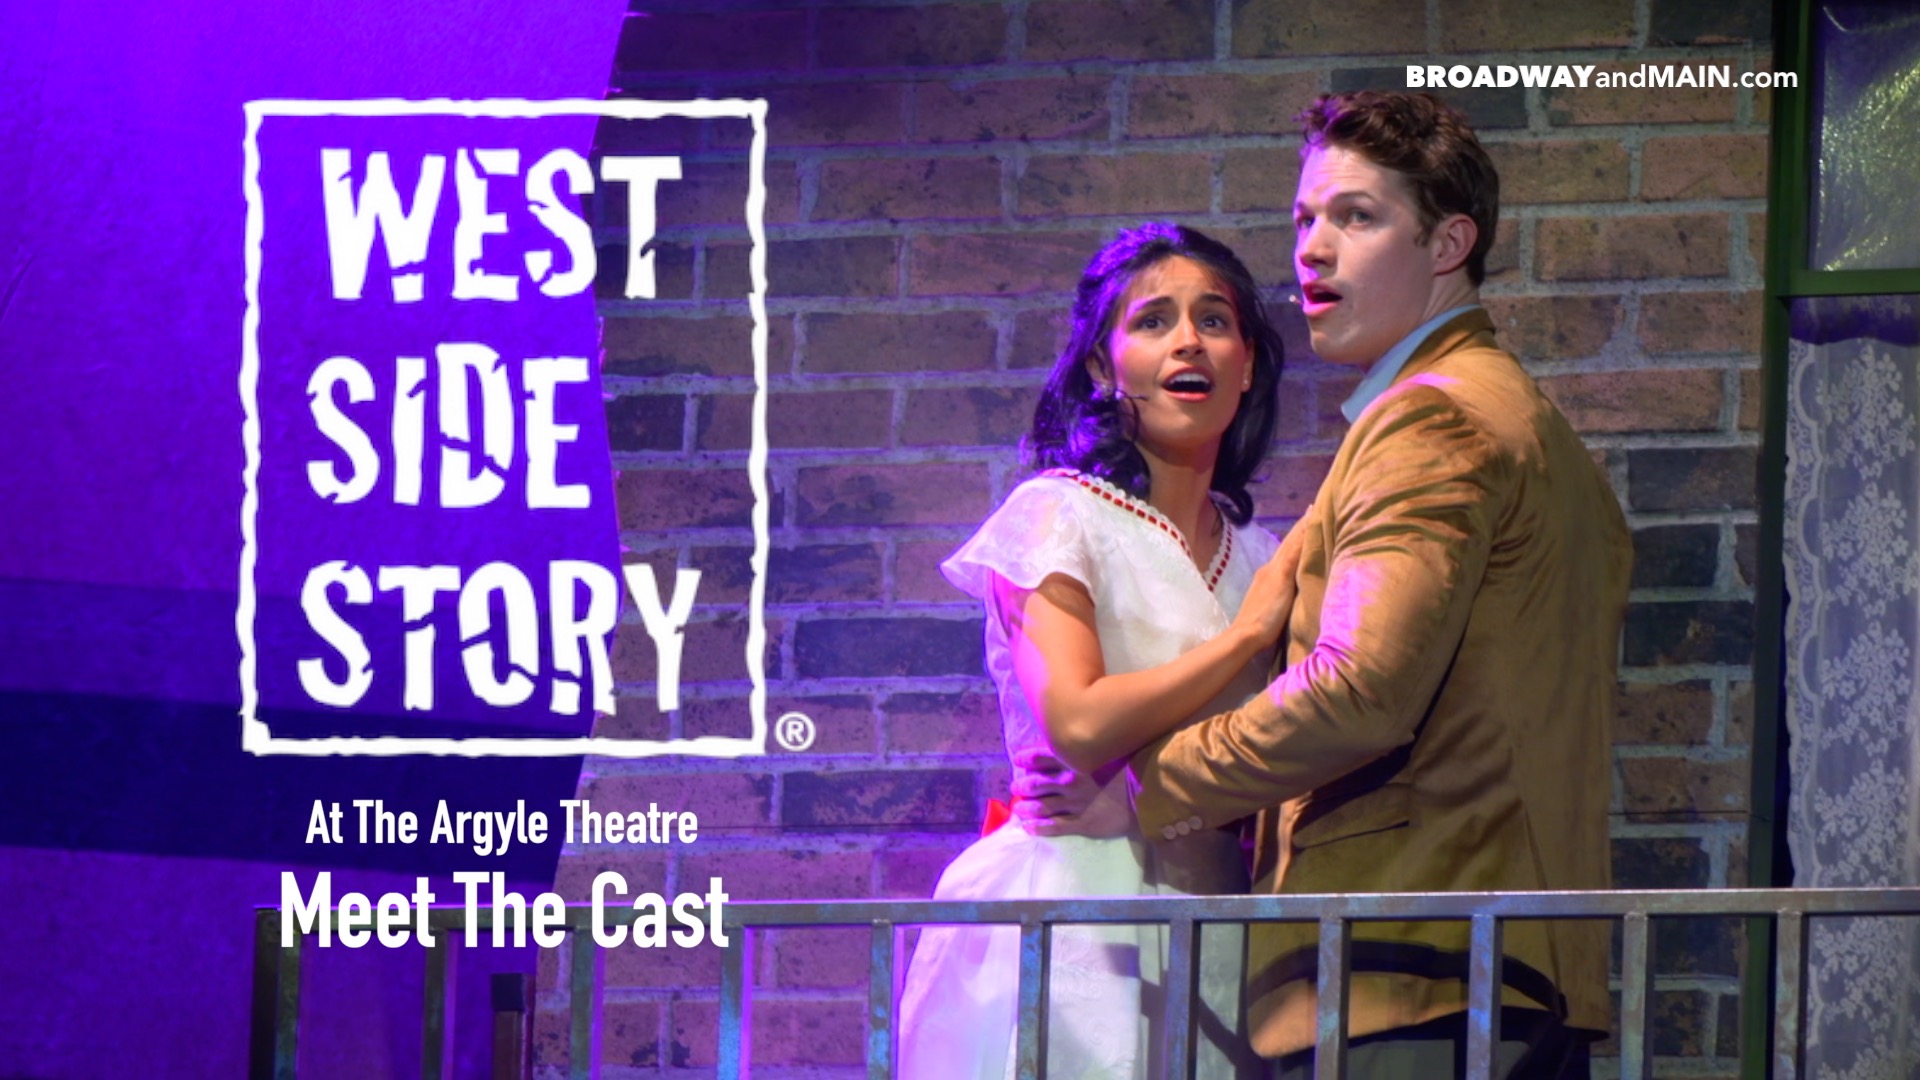 Meet The Cast of West Side Story at the Argyle Theatre